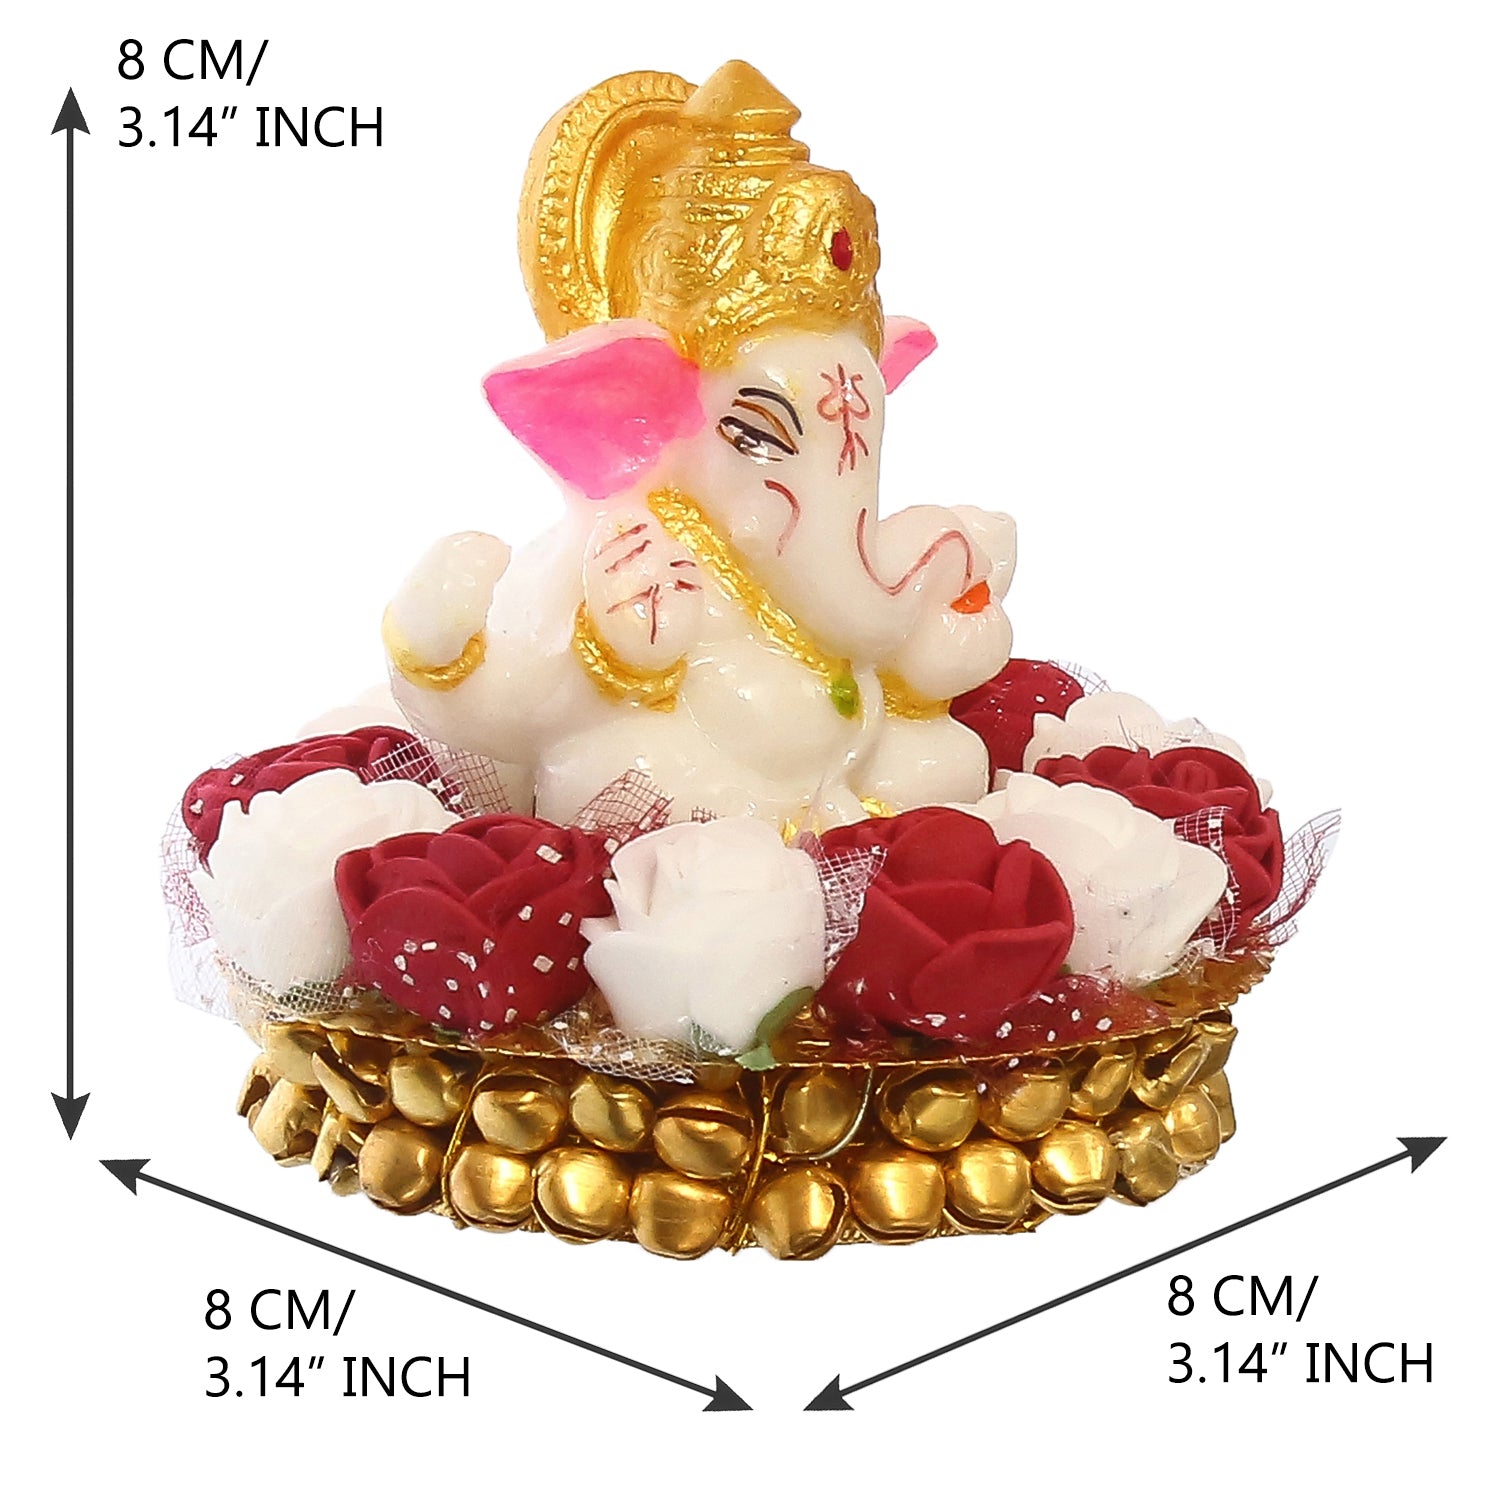 Golden and White Polyresin Lord Ganesha Idol on Decorative Handcrafted Plate with Red and White Flowers 3